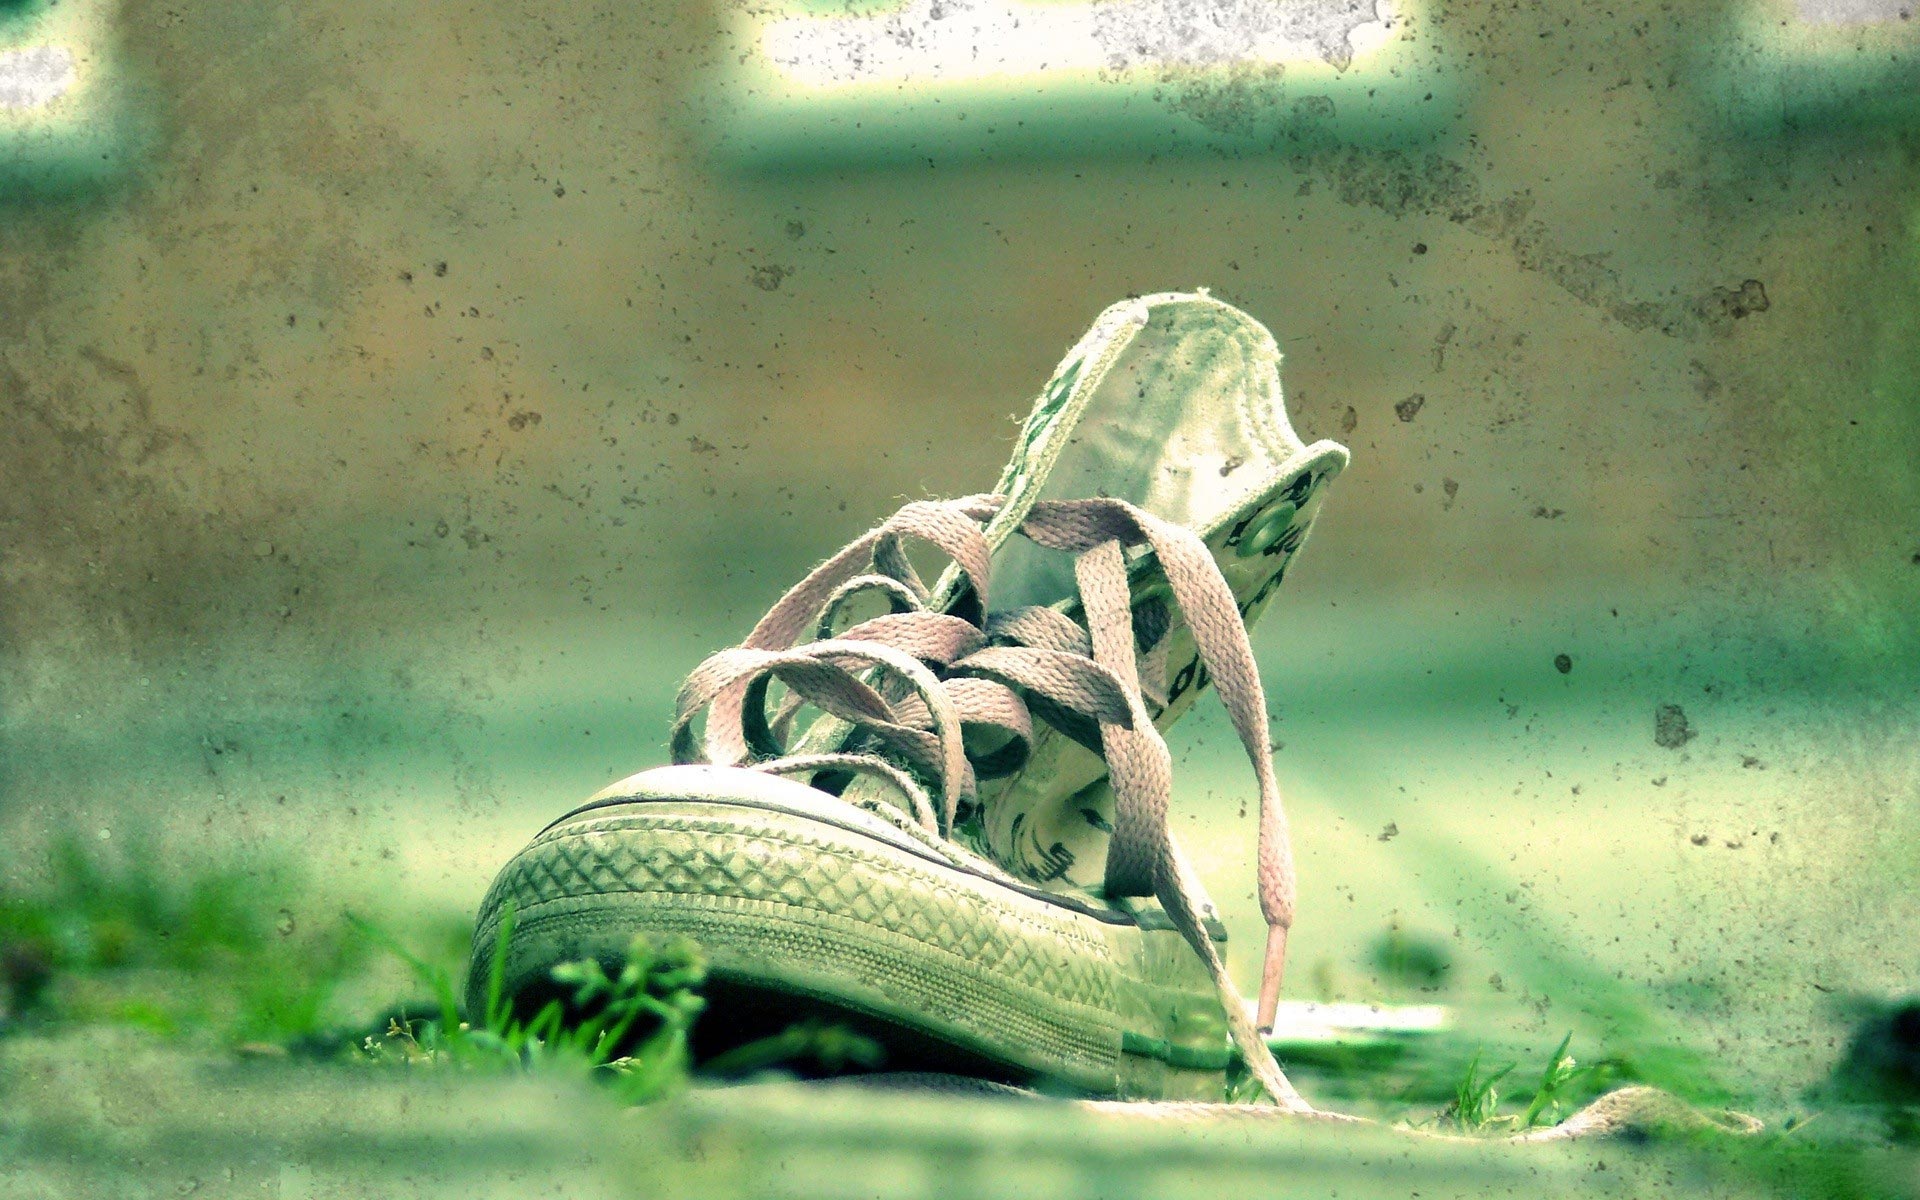 Products Converse 1920x1200